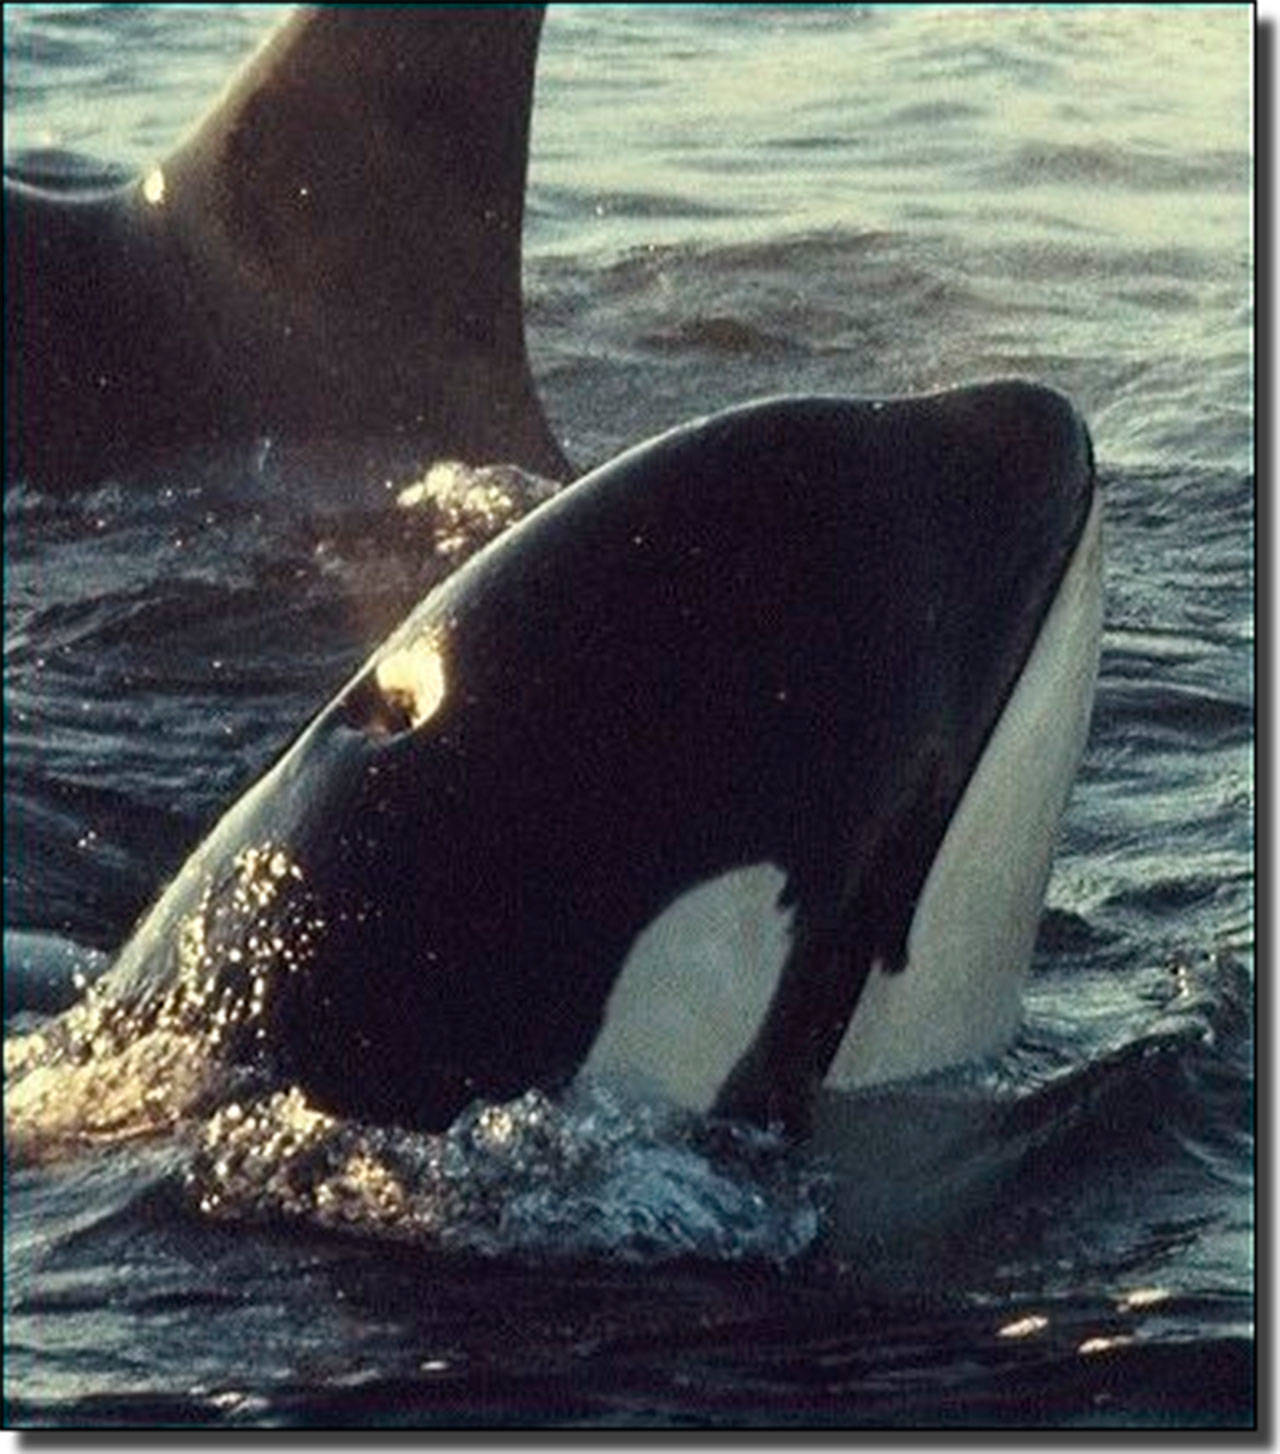 Lolita, also known as Tokitae, shown during her Penn Cove capture.